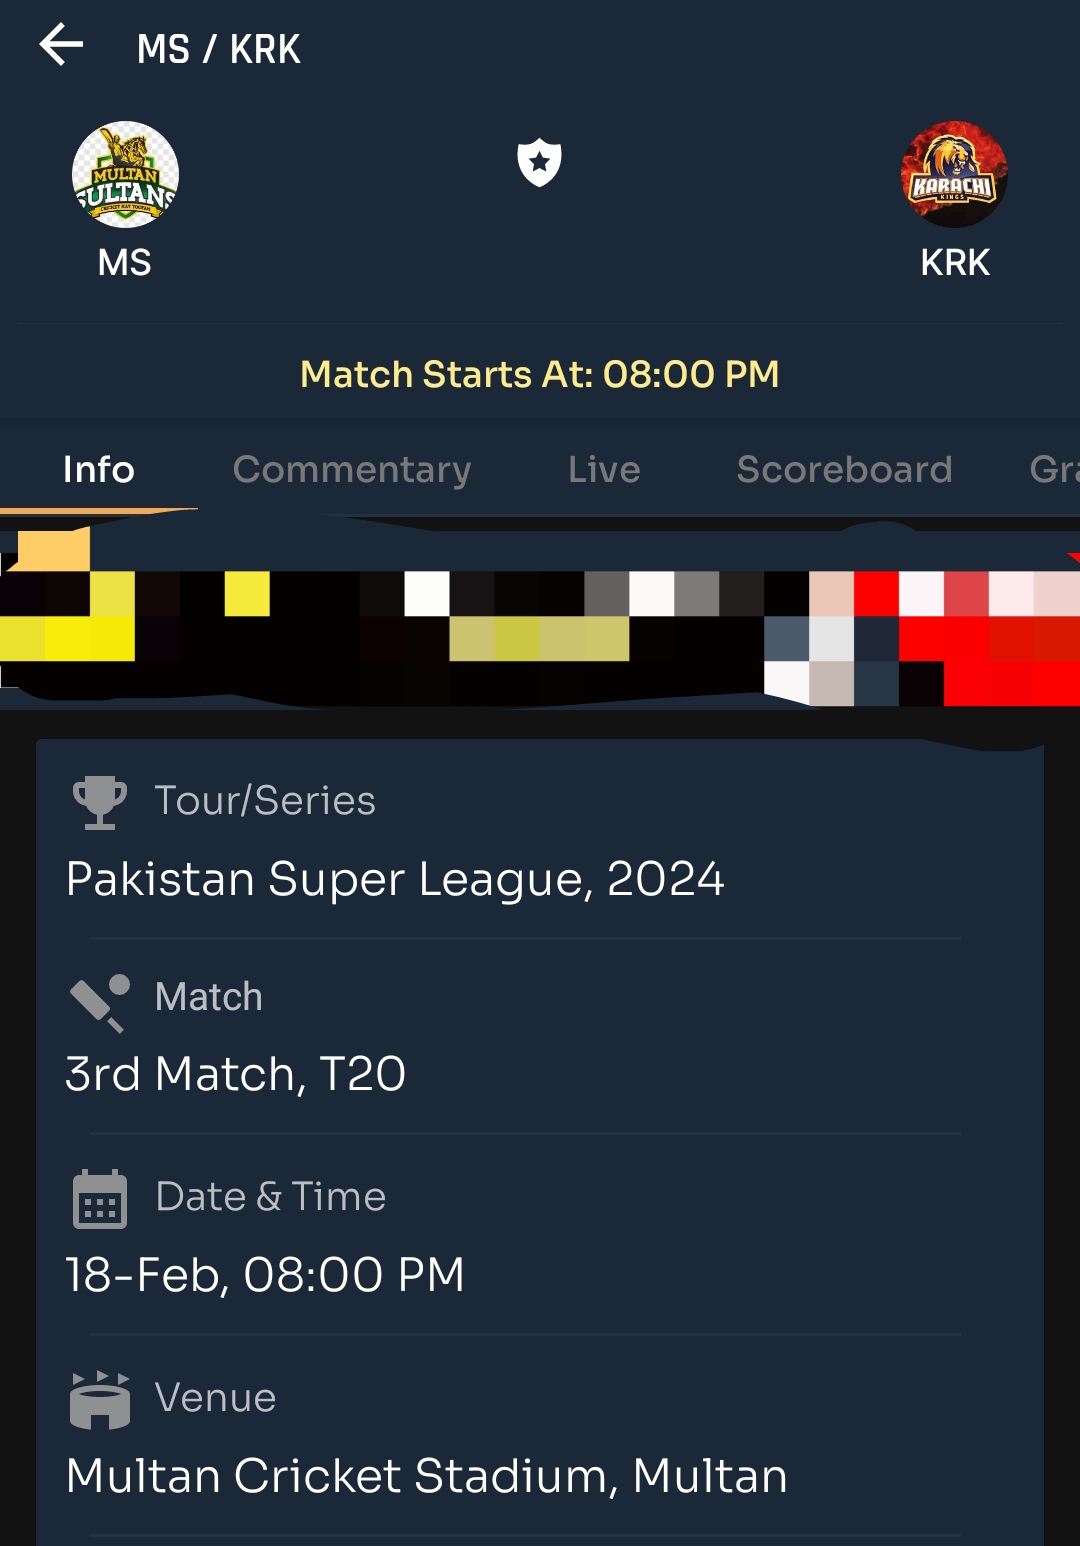 Today PSL Prediction |Match Number 3|MS vs KRK| Toss and Match Analysis | Pitch & Weather Reports